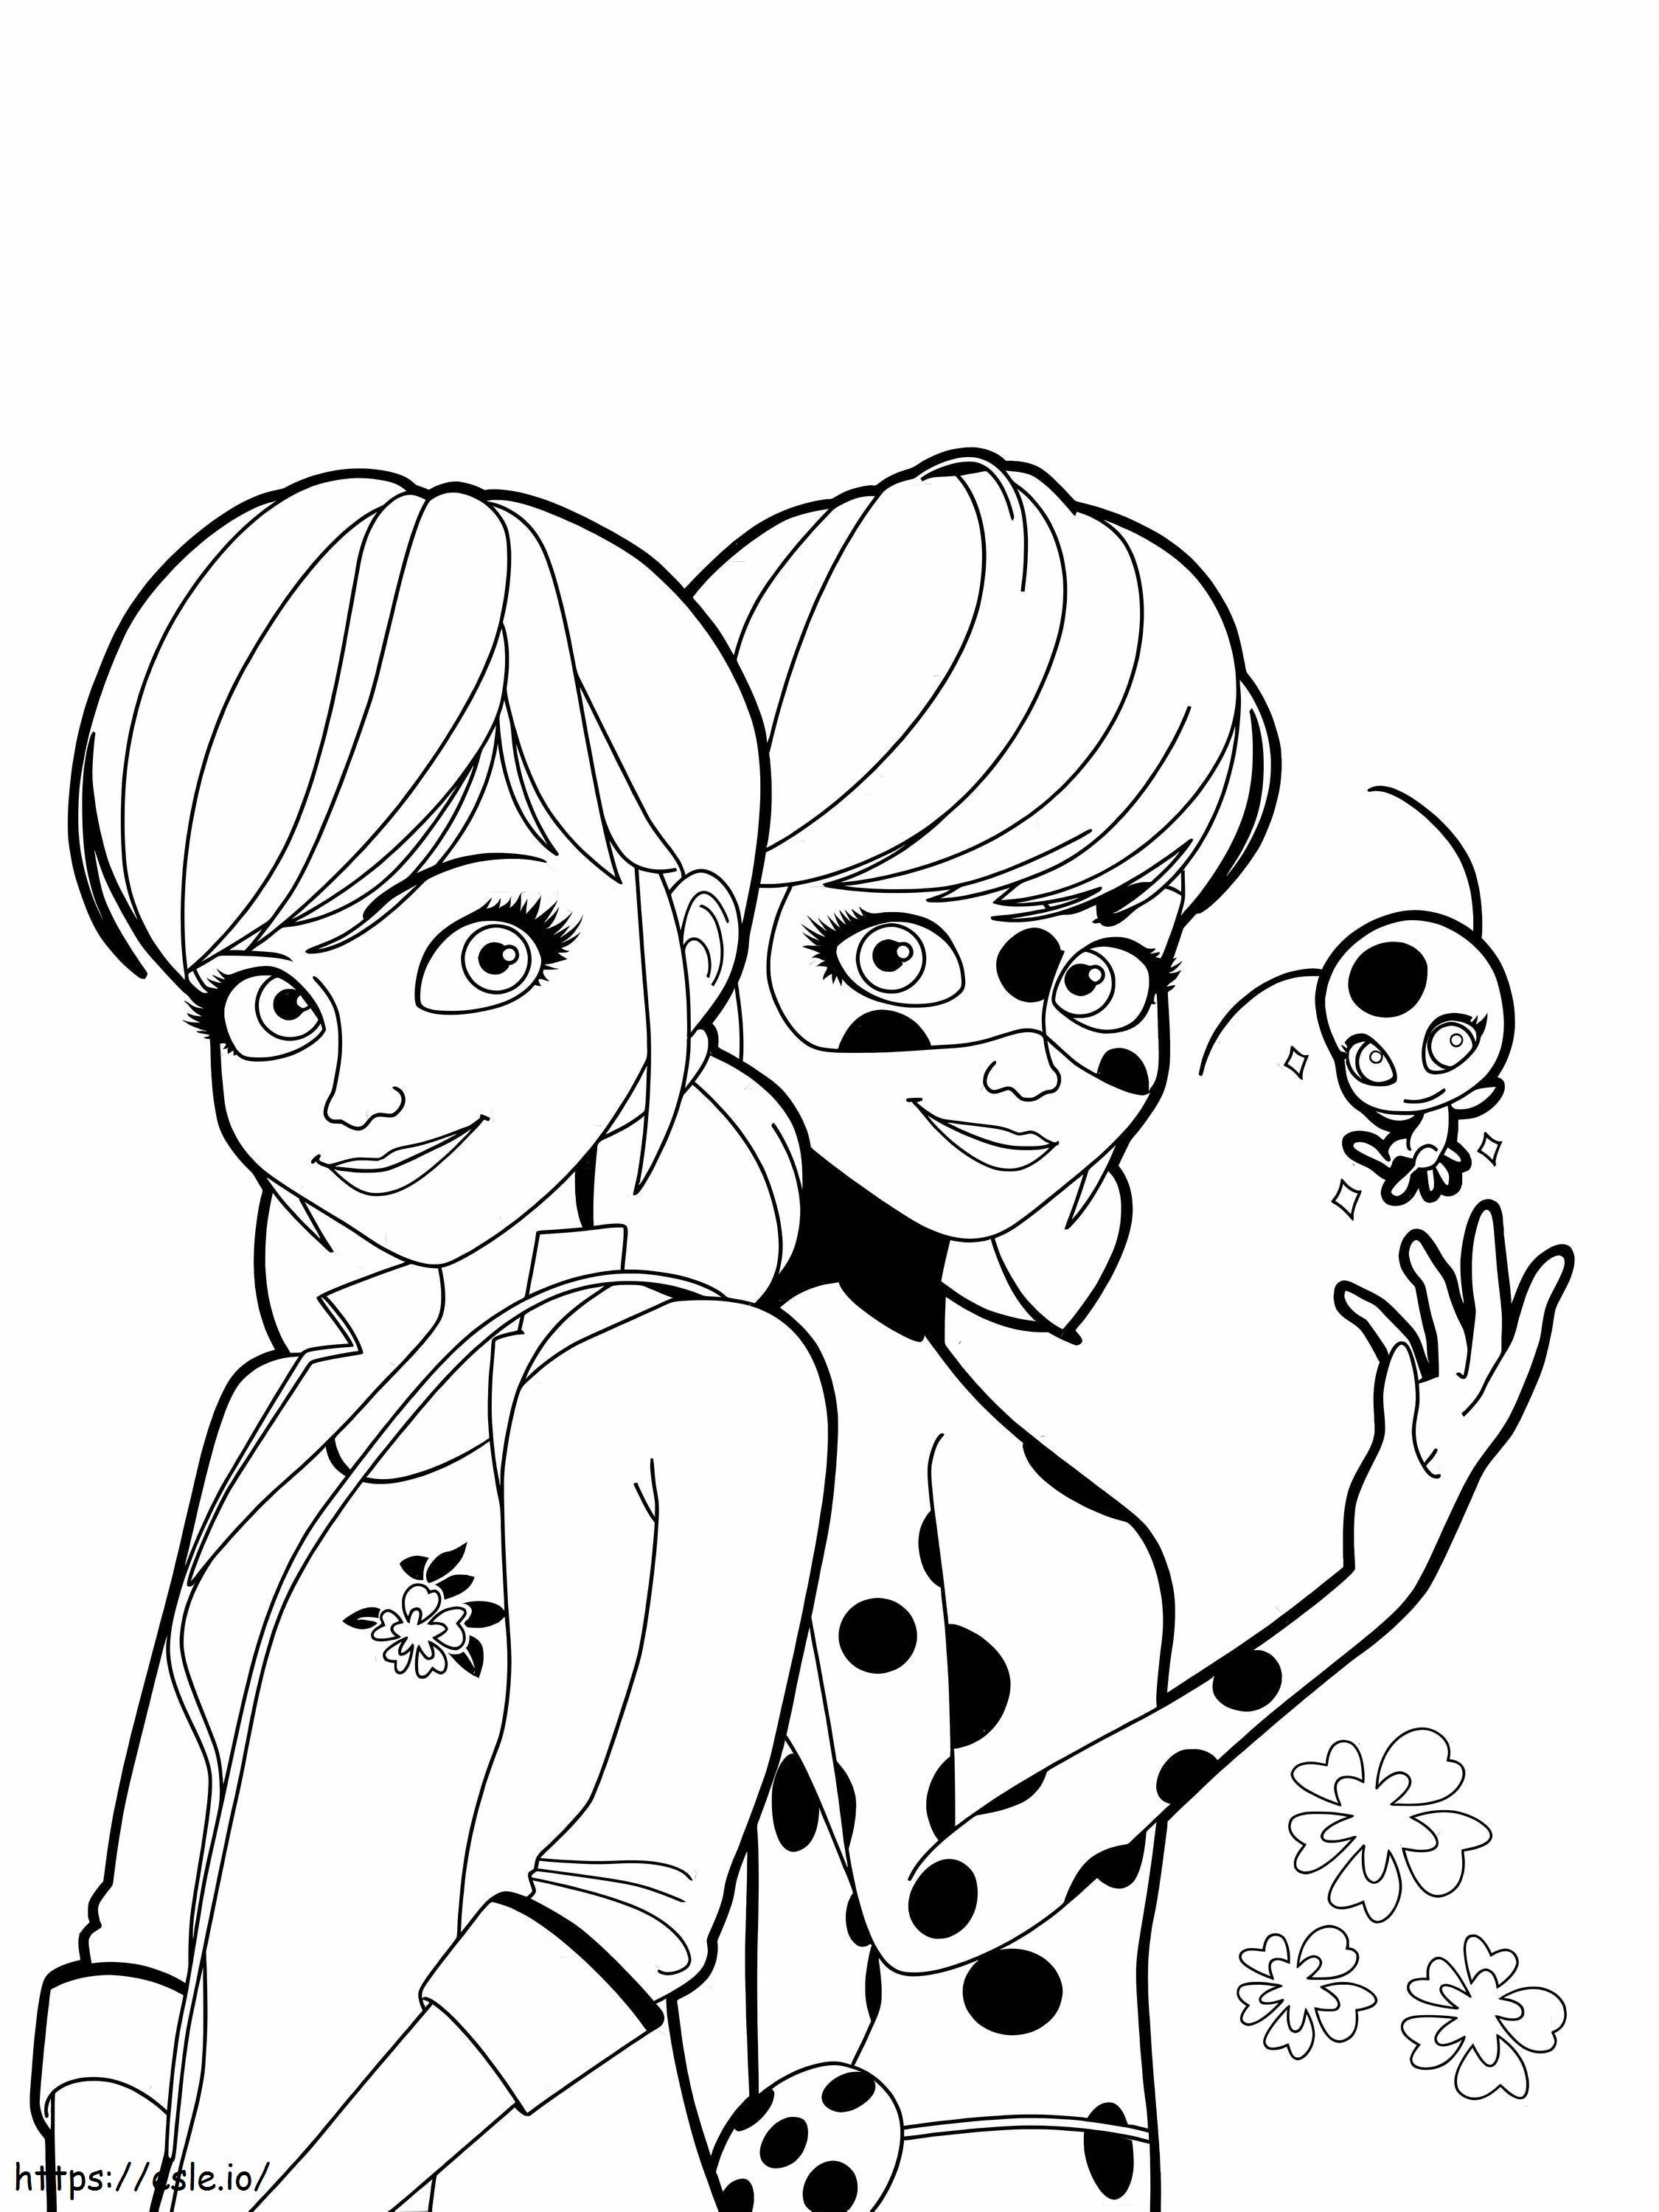 Ladybug And Black Cat coloring page